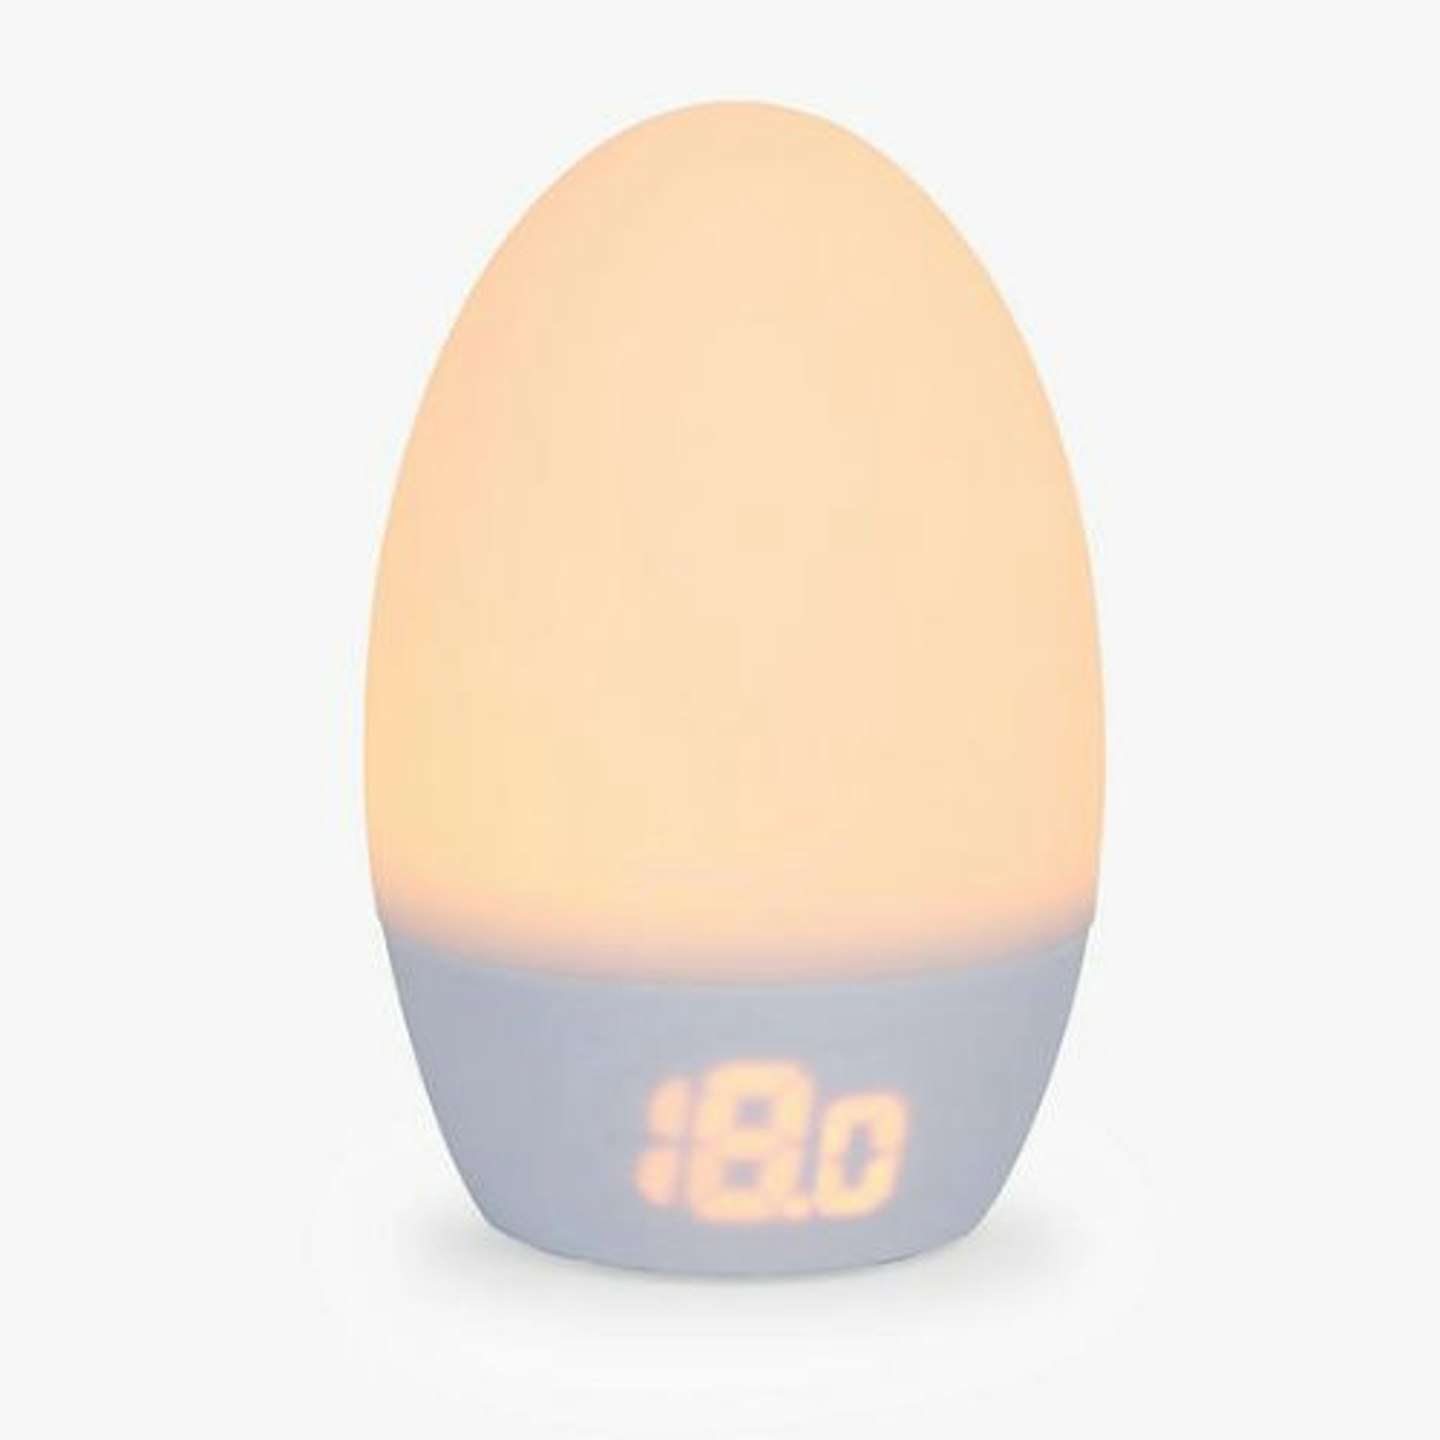 https://images.bauerhosting.com/affiliates/sites/12/motherandbaby/2022/08/Tommee-Tippee-GroEgg2-Digital-Room-Thermometer.jpg?auto=format&w=1440&q=80